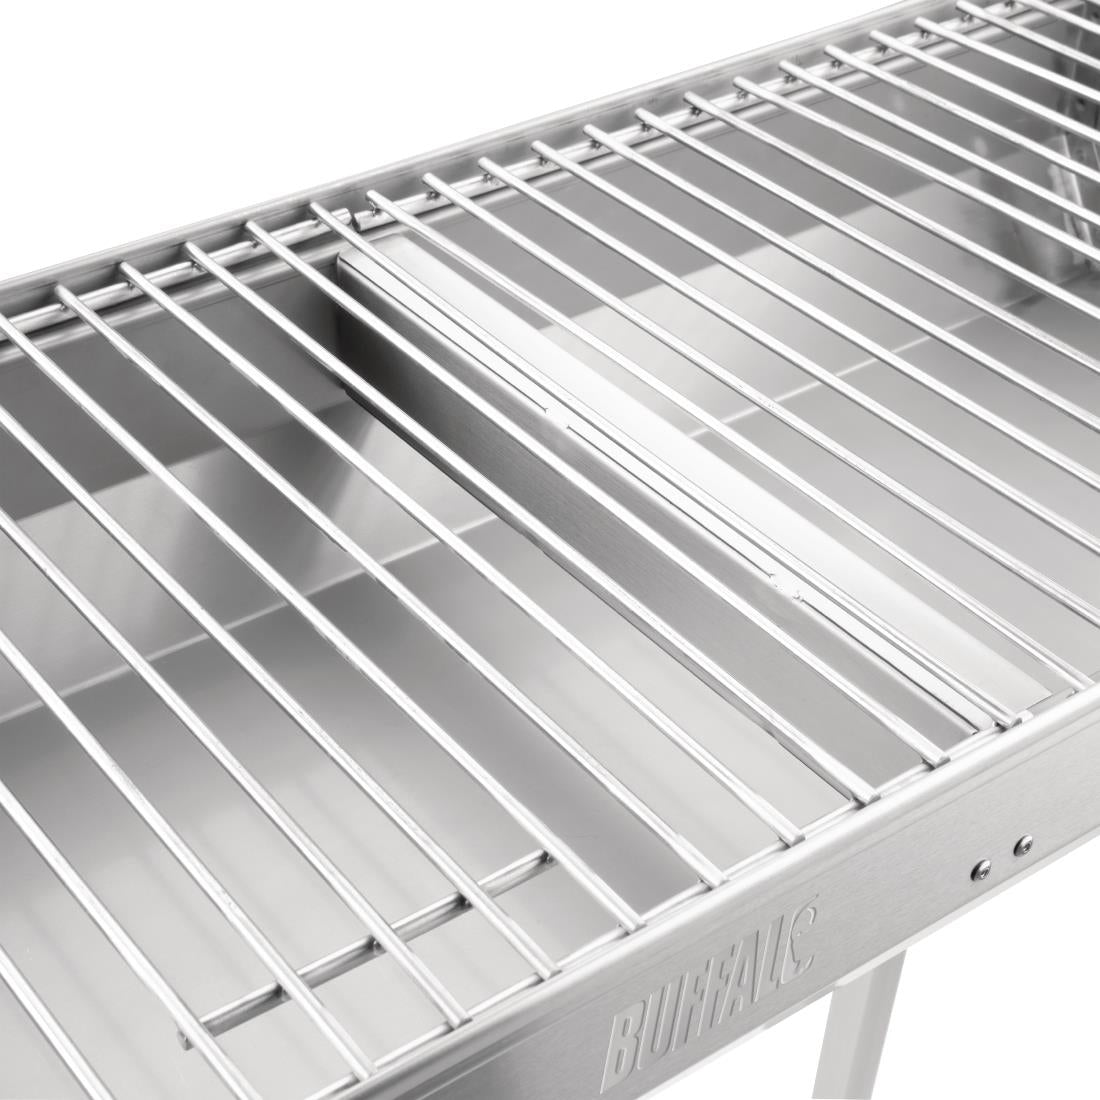 FT690 - Buffalo Charcoal Barbecue JD Catering Equipment Solutions Ltd